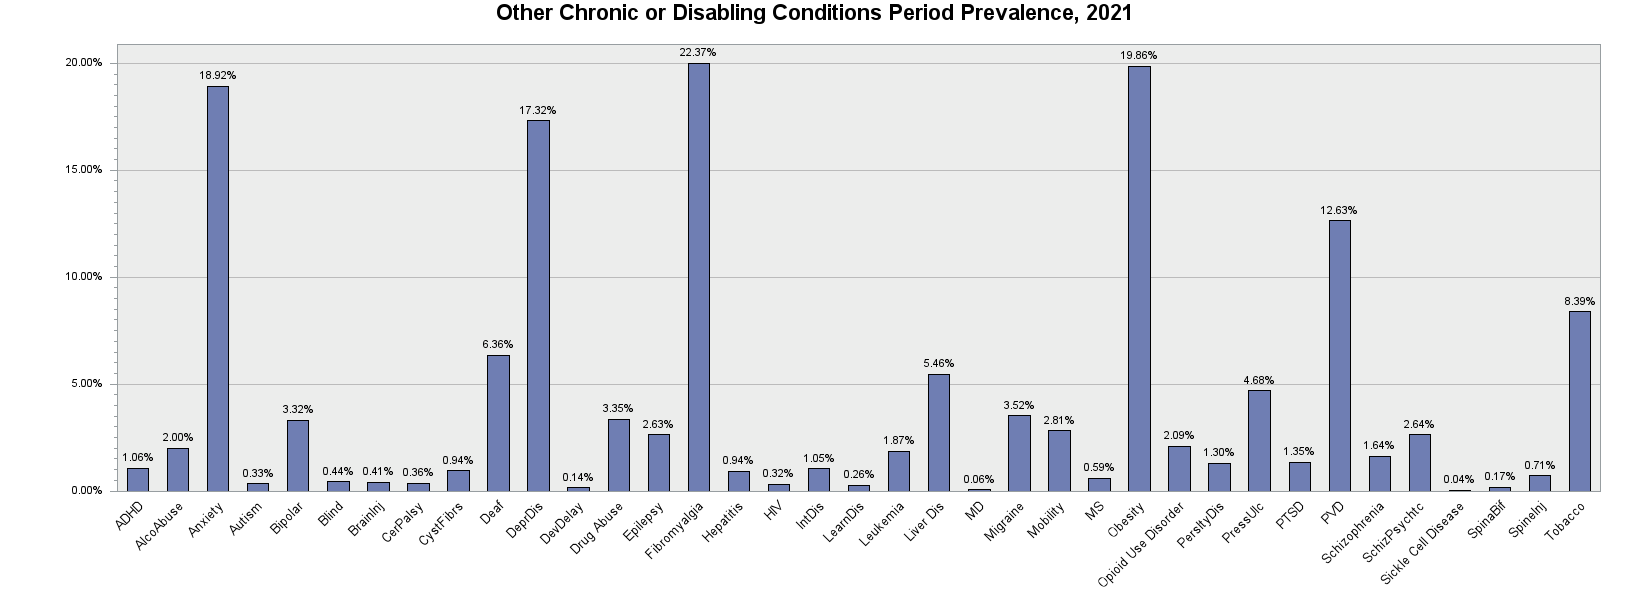 Chart for Other Chronic or Disabling Conditions Period Prevalence, 2021